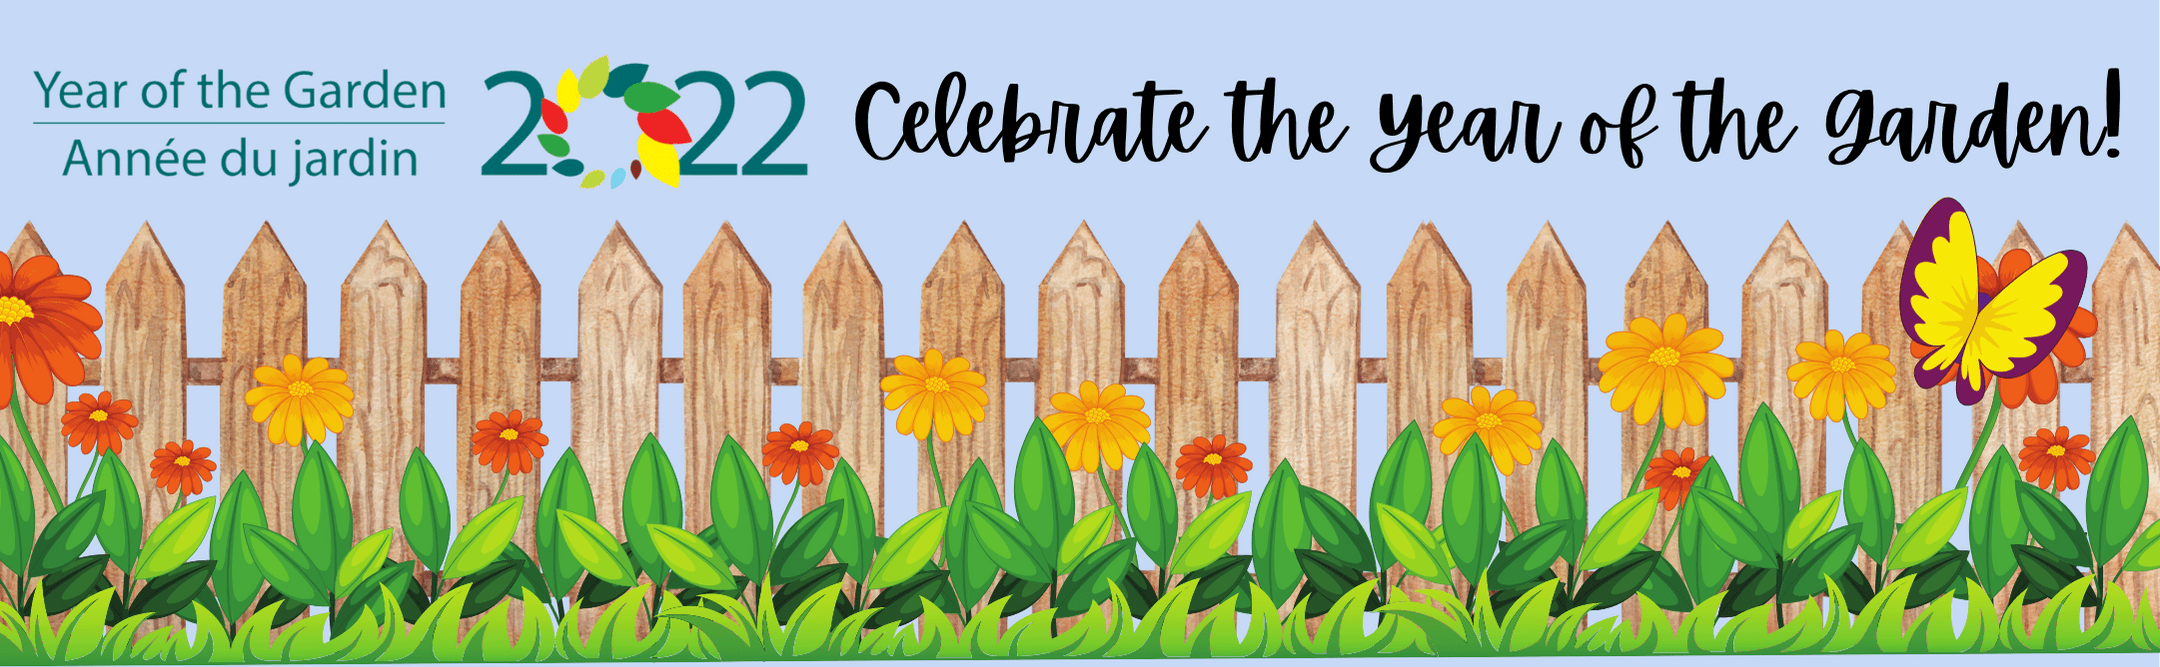 Celebrate the Year of the Garden!